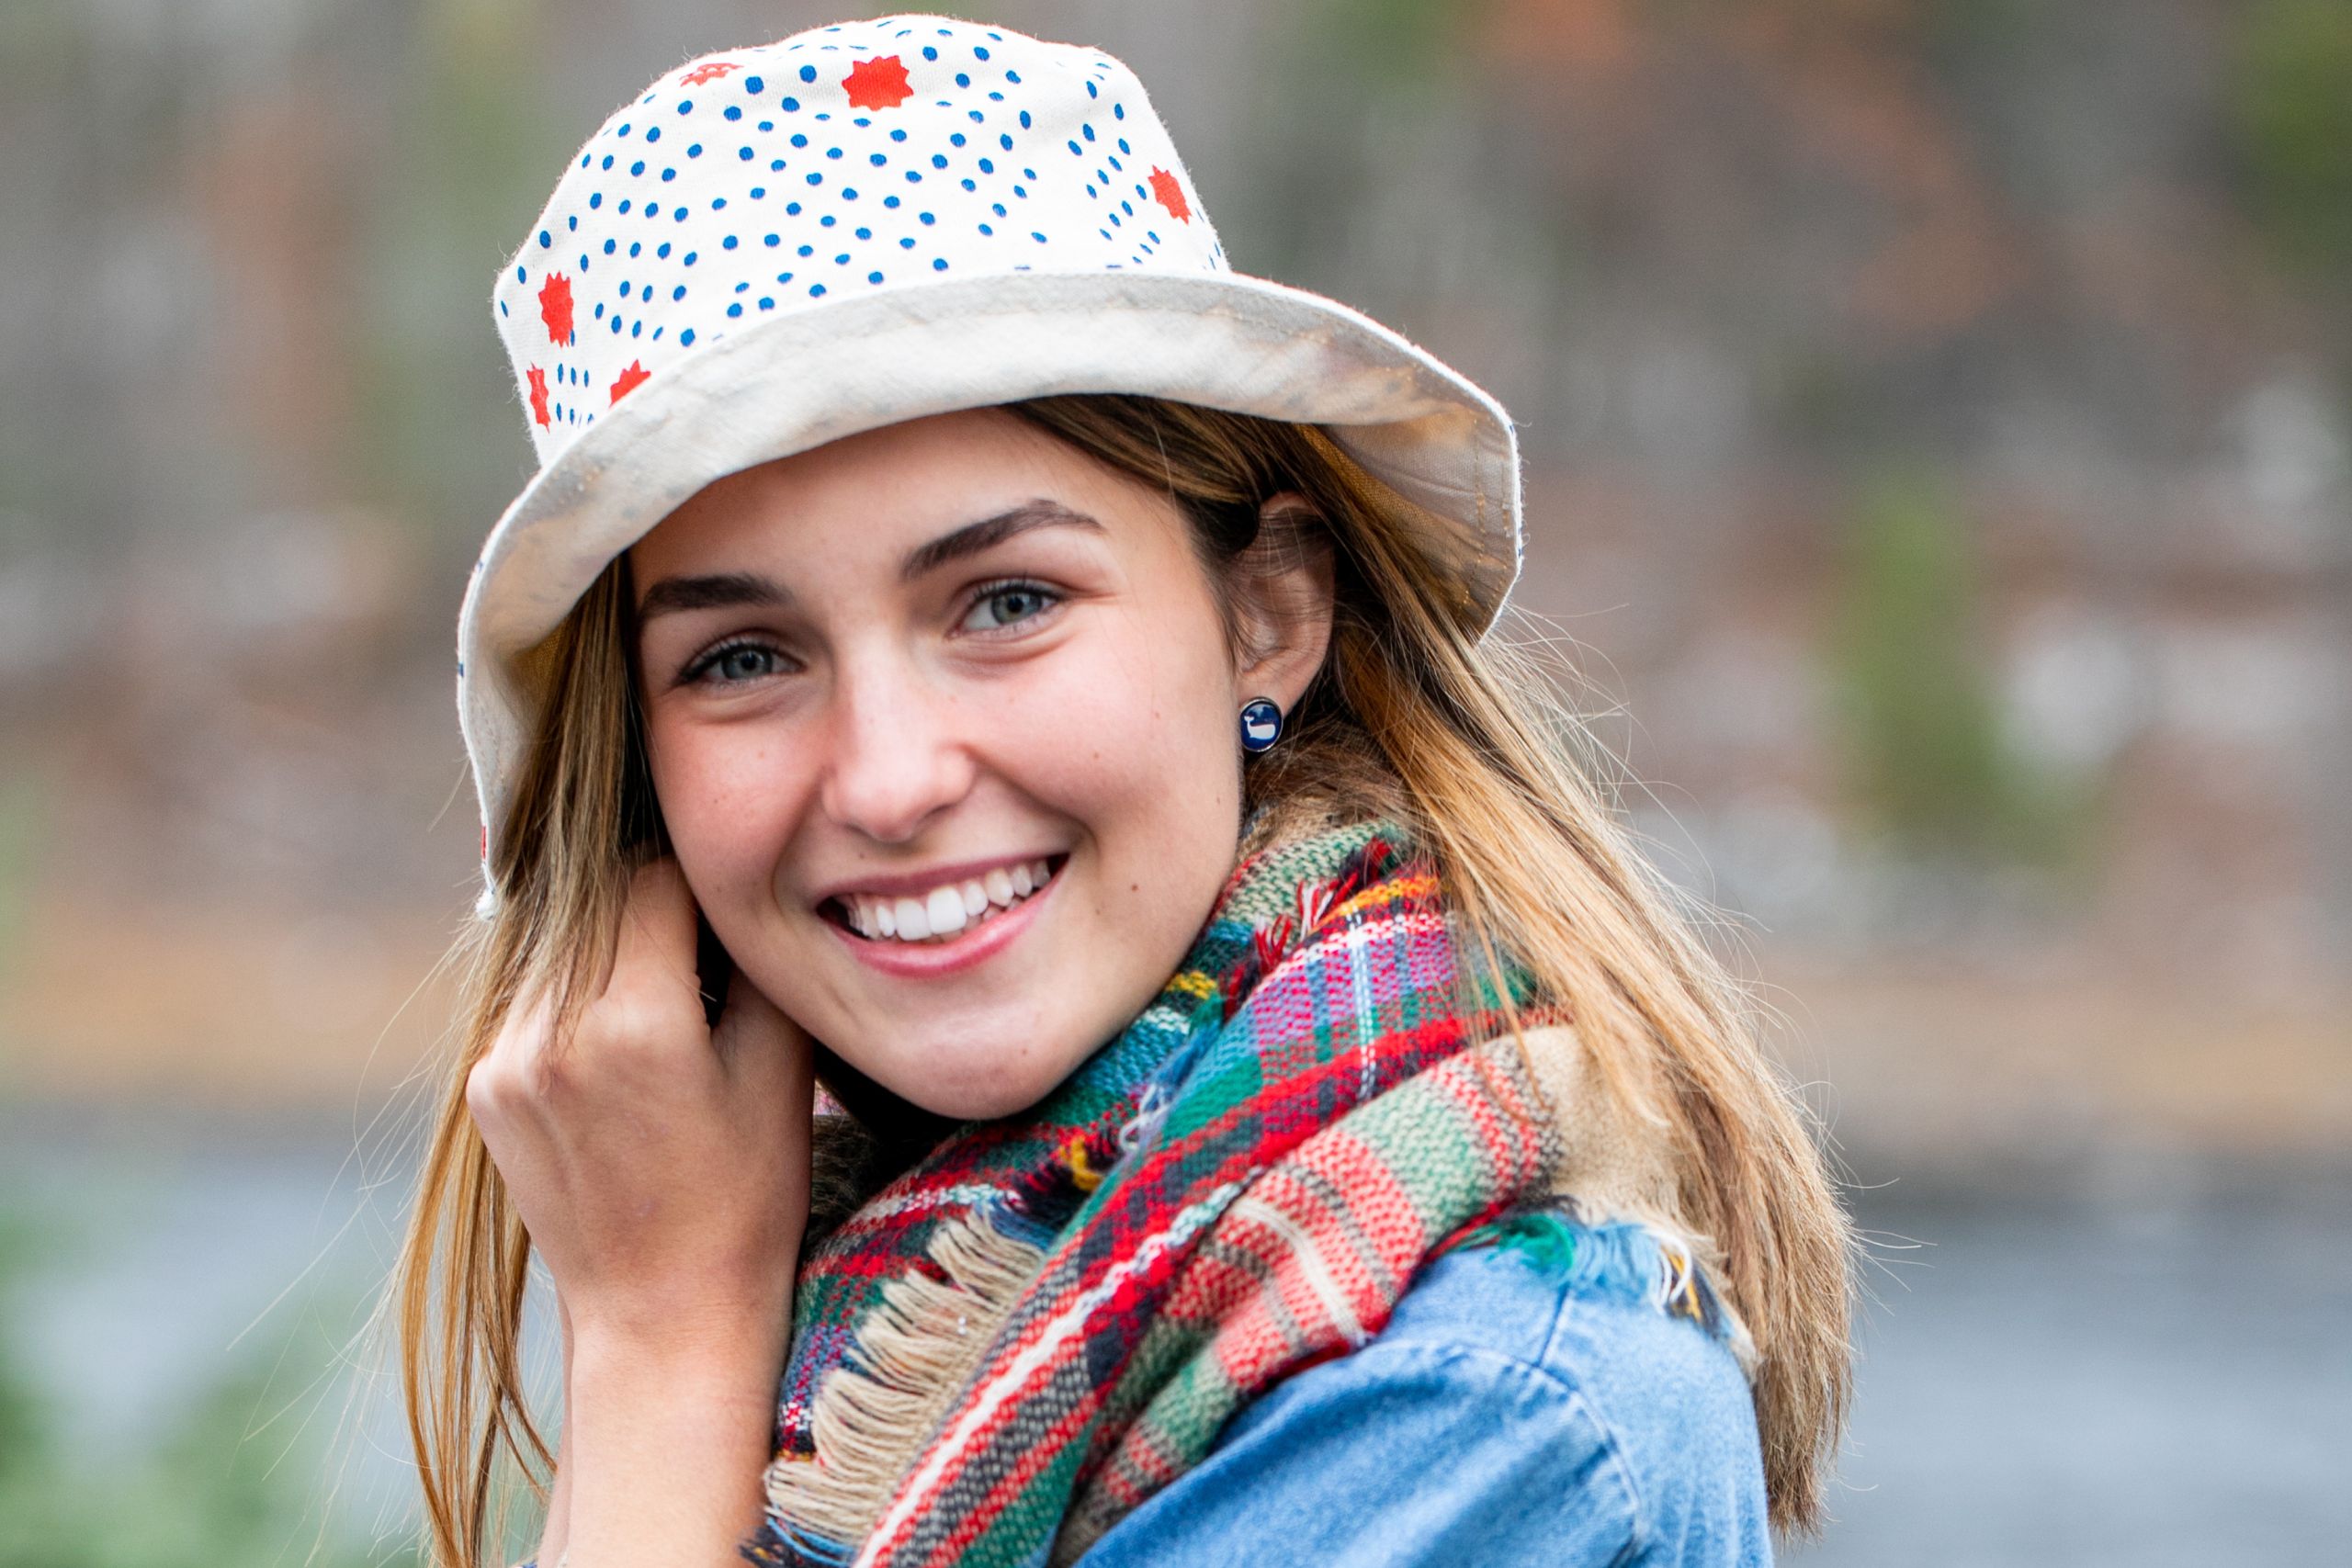 A woman poses for the camera while wearing a bucket hat